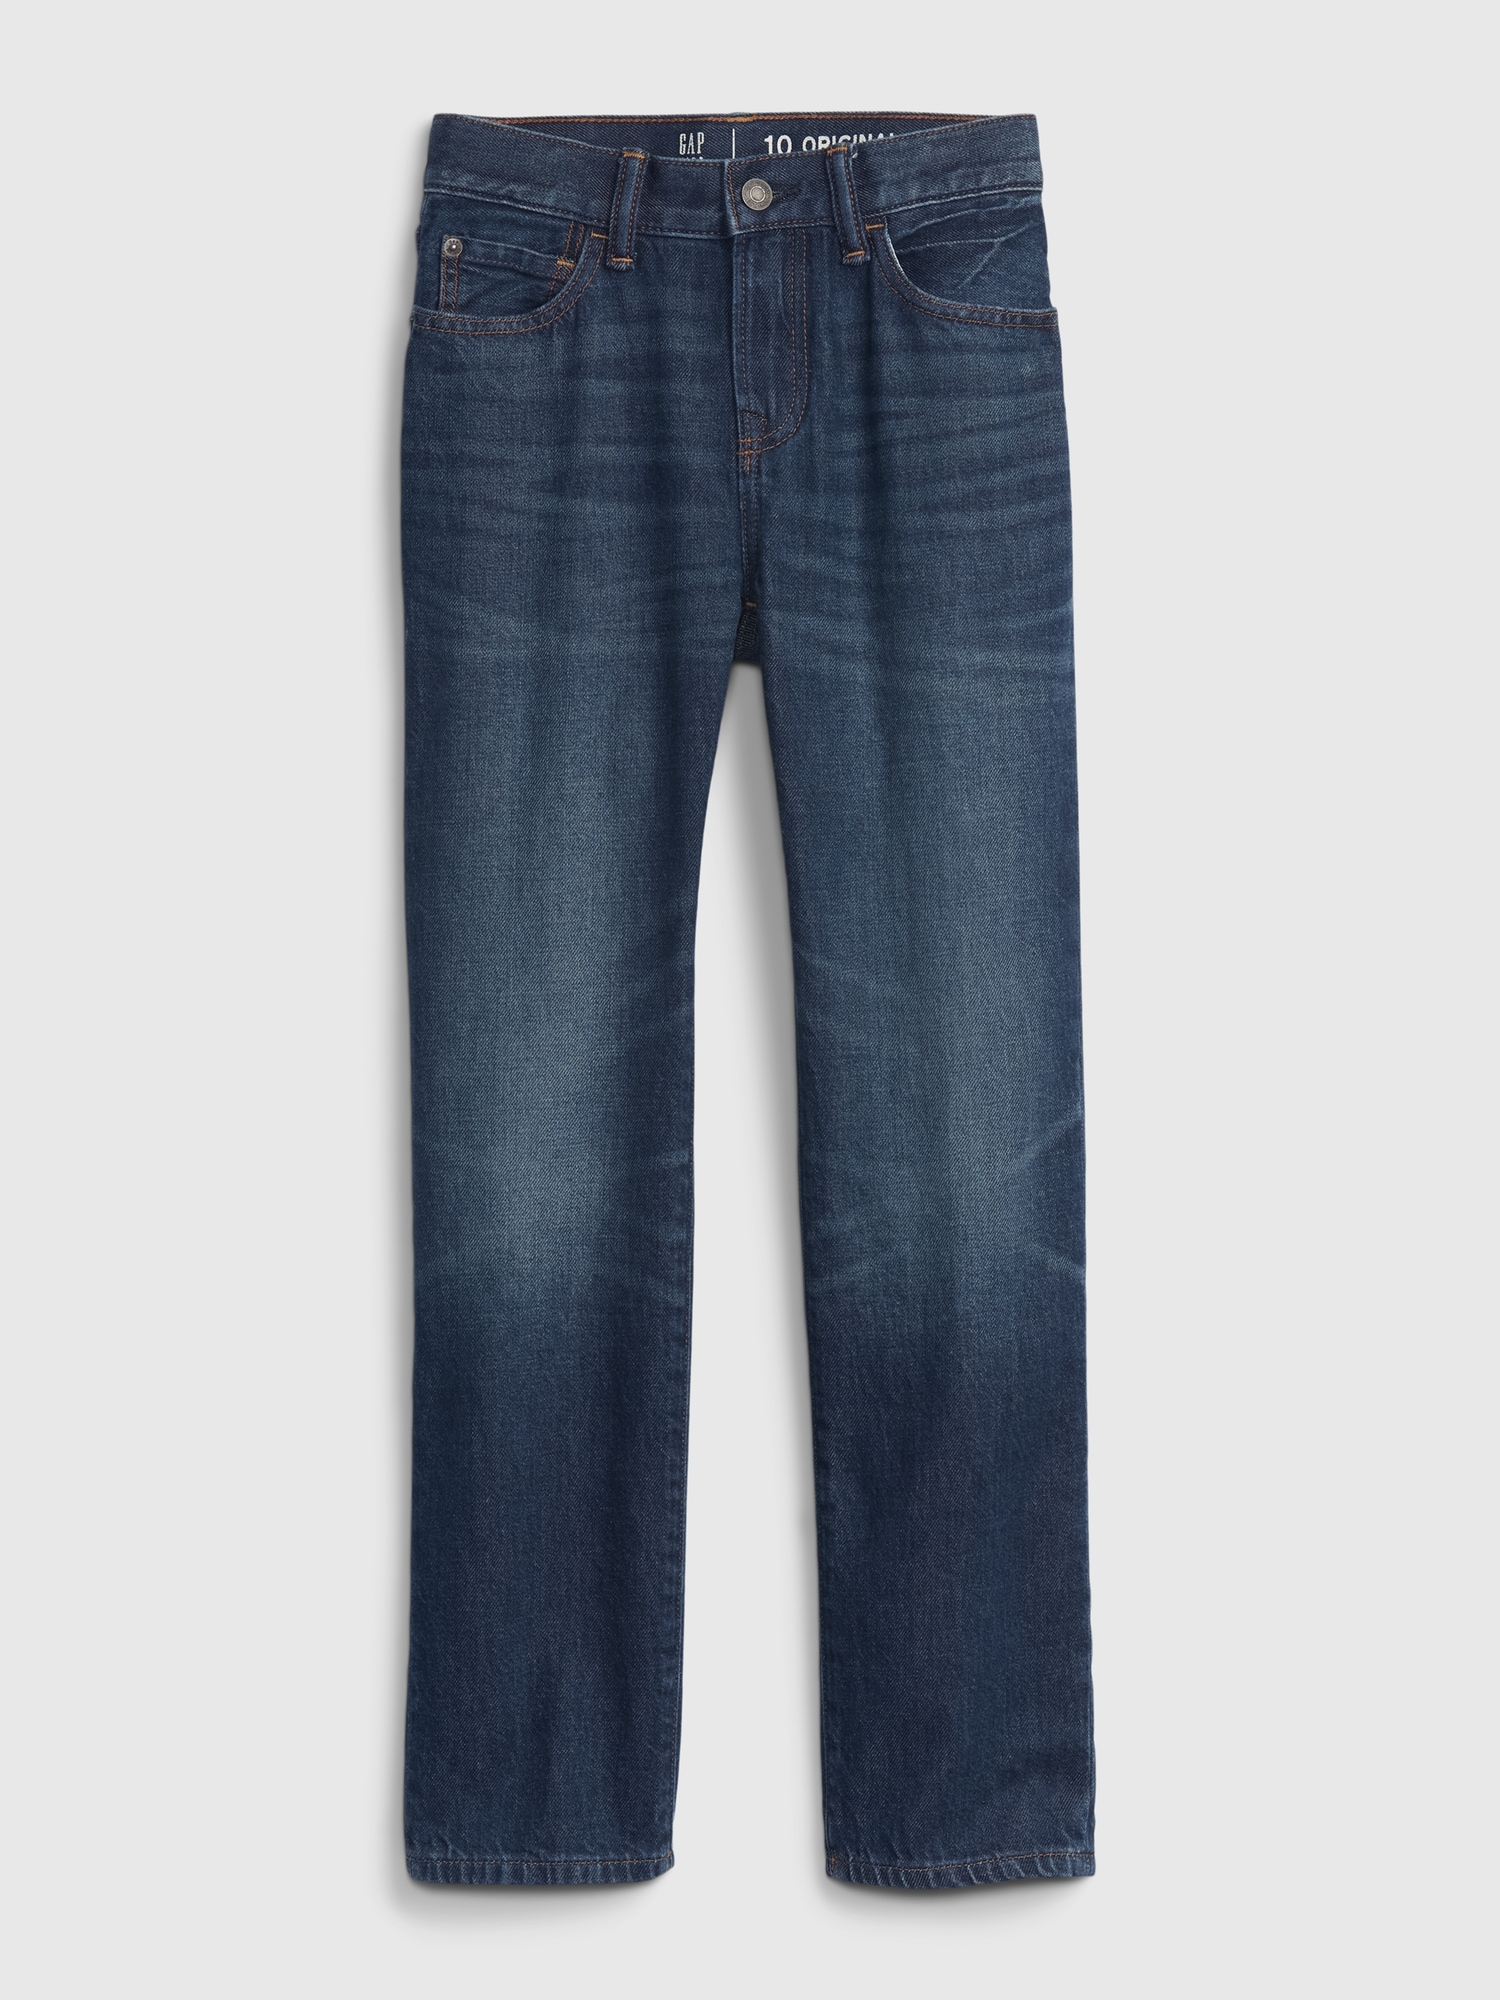 Kids Original Straight Jeans with Washwell | Gap